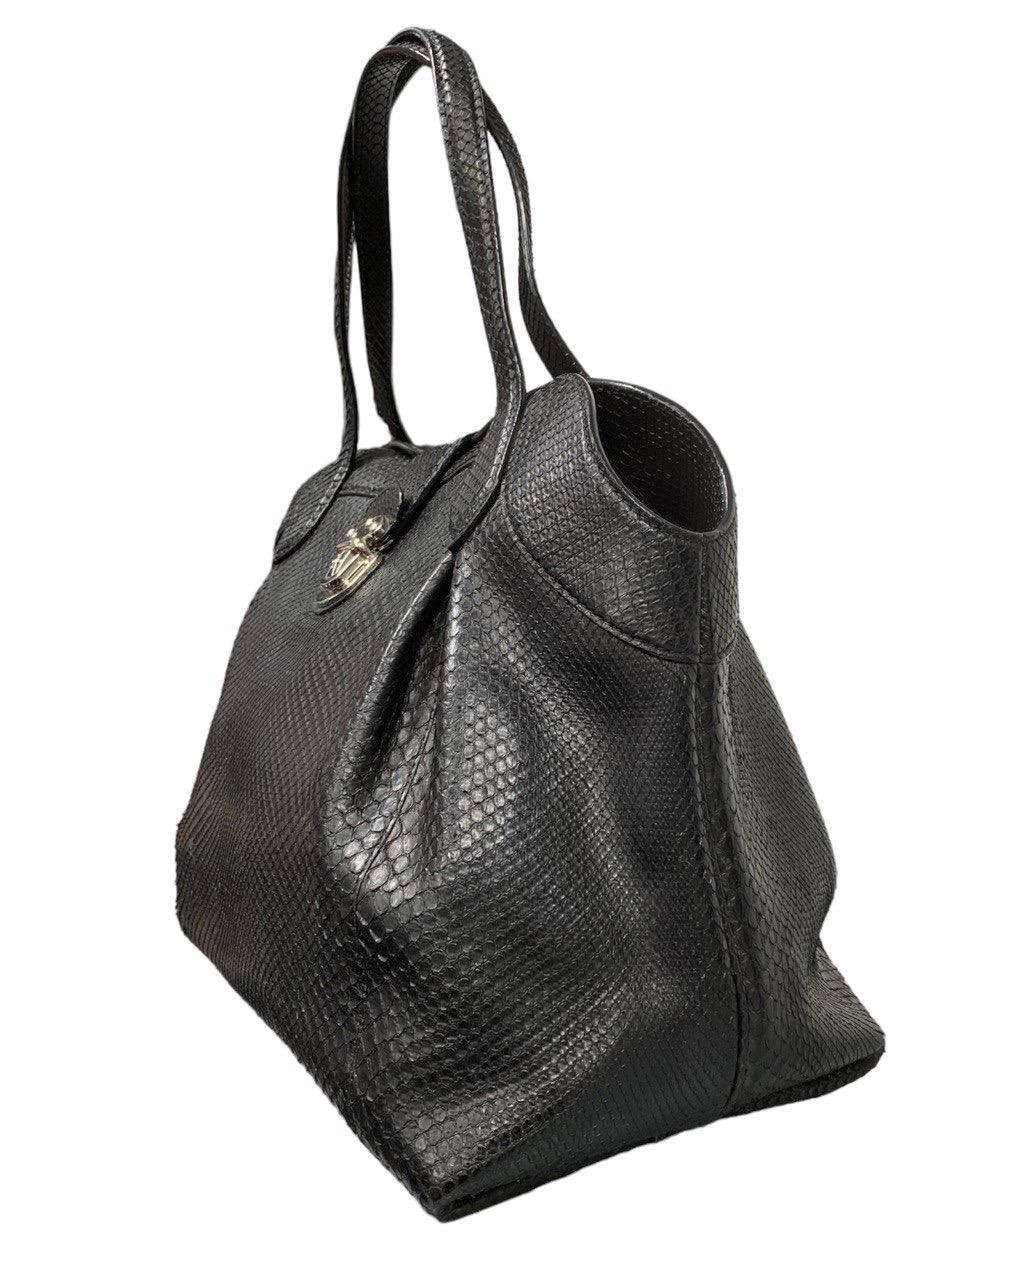 Louis Vuitton signed bag, Mahina Cirrus model, made of black python leather with silver hardware.

Equipped with double leather handle to wear the bag by hand or on the shoulder.

Internally lined in black leather, quite roomy, it has pockets with